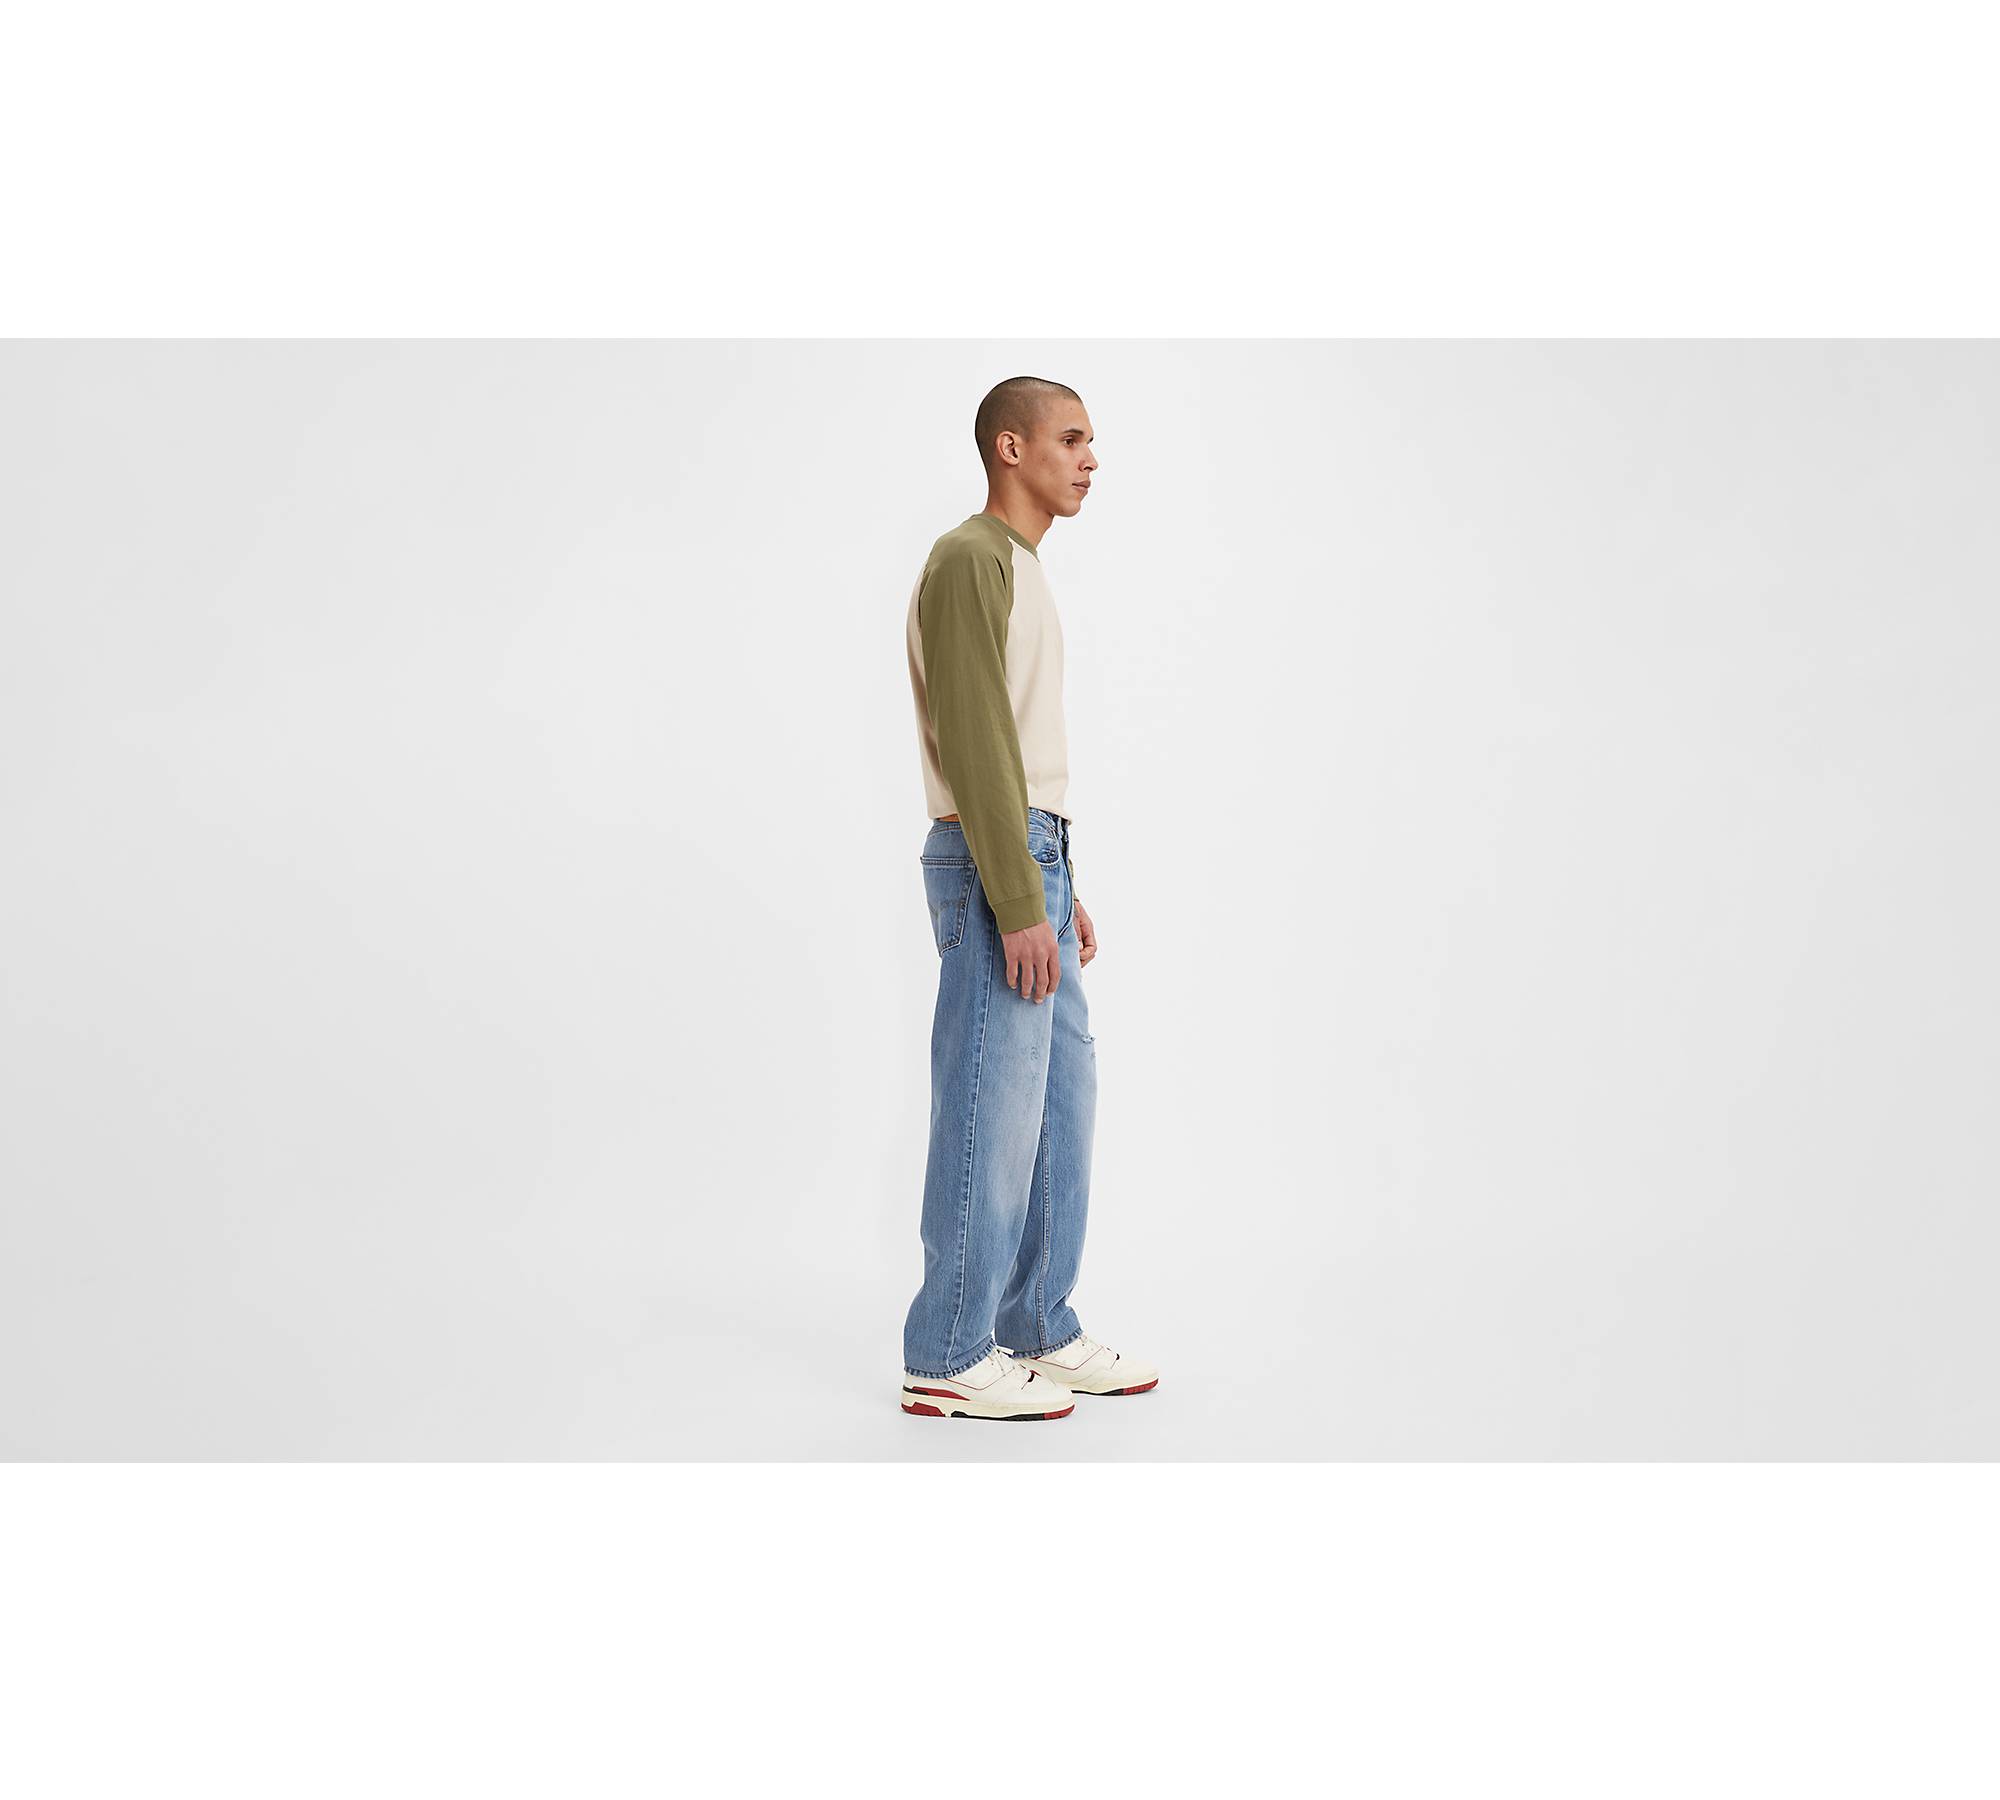 550™ Relaxed Fit Men's Jeans - Medium Wash | Levi's® US